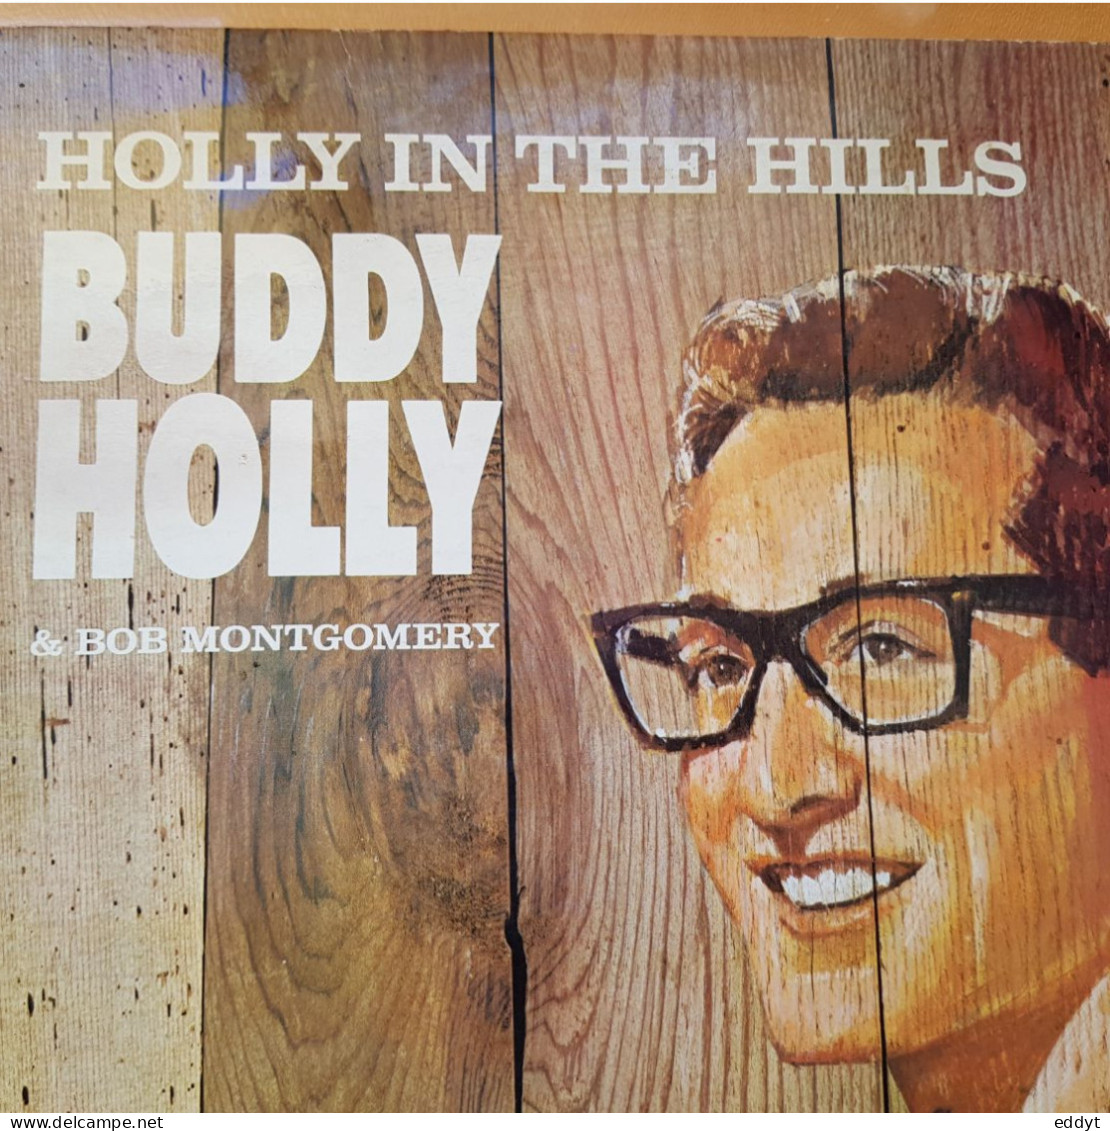 Vinyle Disque 33T - BUDDY HOLLY & Bob Montgomery  - Holly In The Hills - TBE